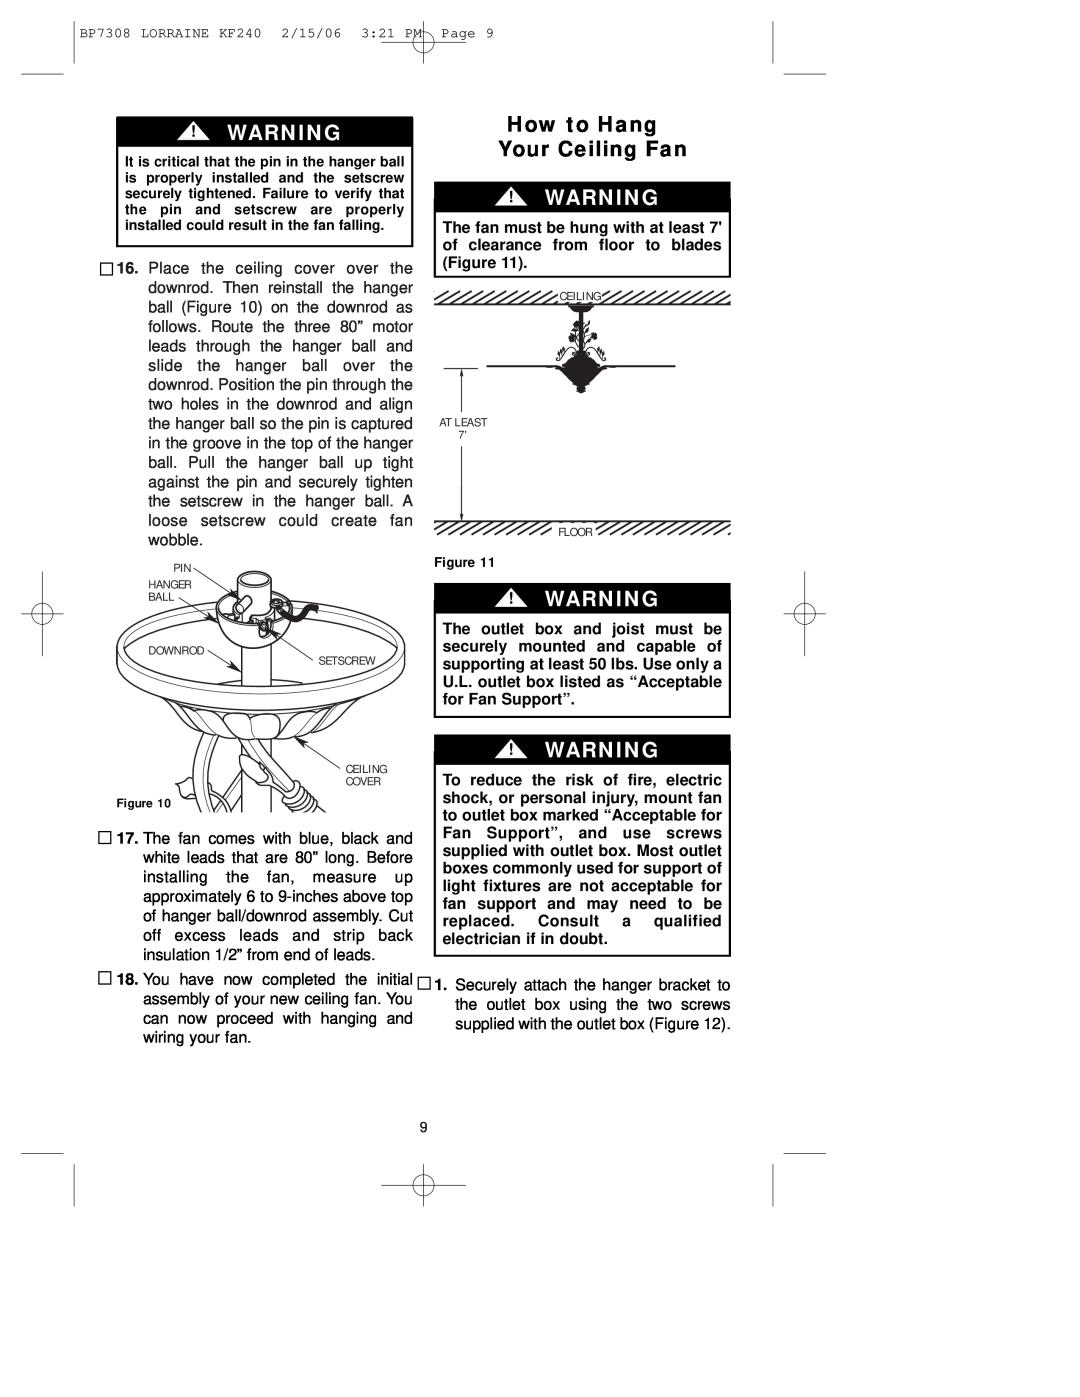 Emerson KF240PRZ00 owner manual How to Hang Your Ceiling Fan 